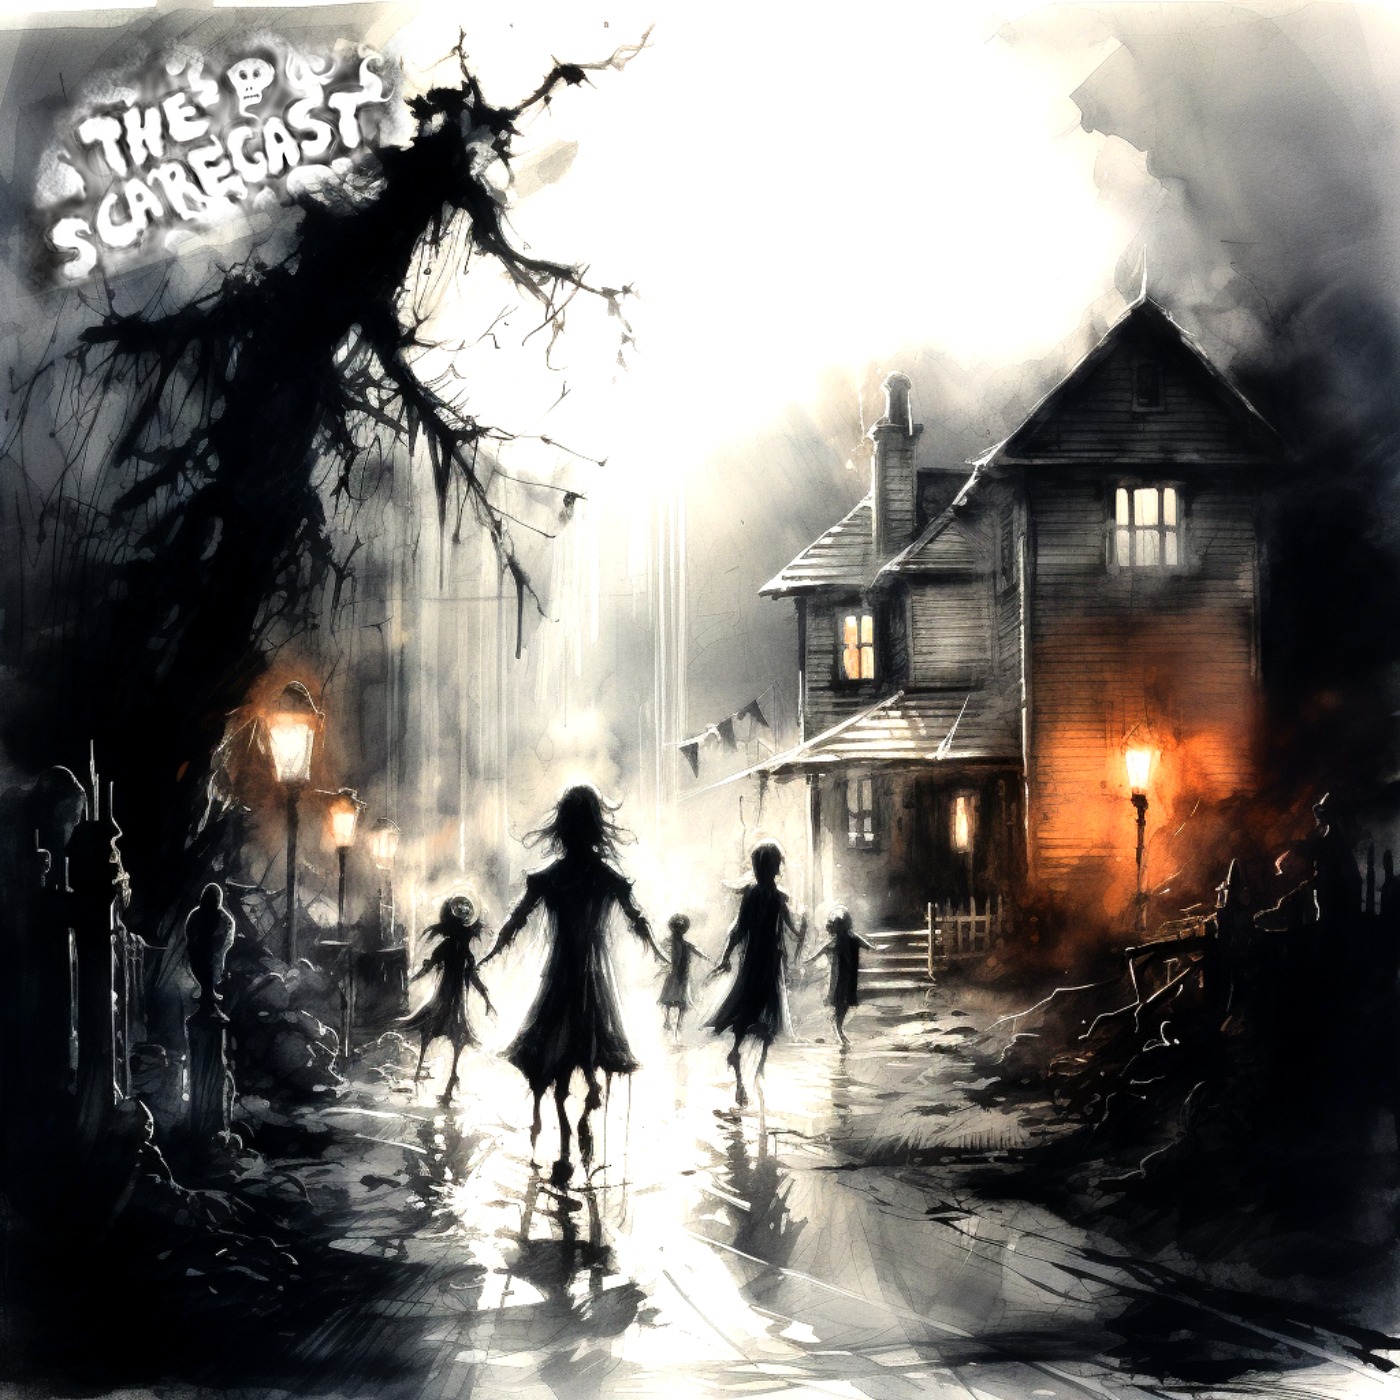 The Scarecast Files #4: The Man Who Ruined Trick-Or-Treating (Ronald Clark O'Bryan)